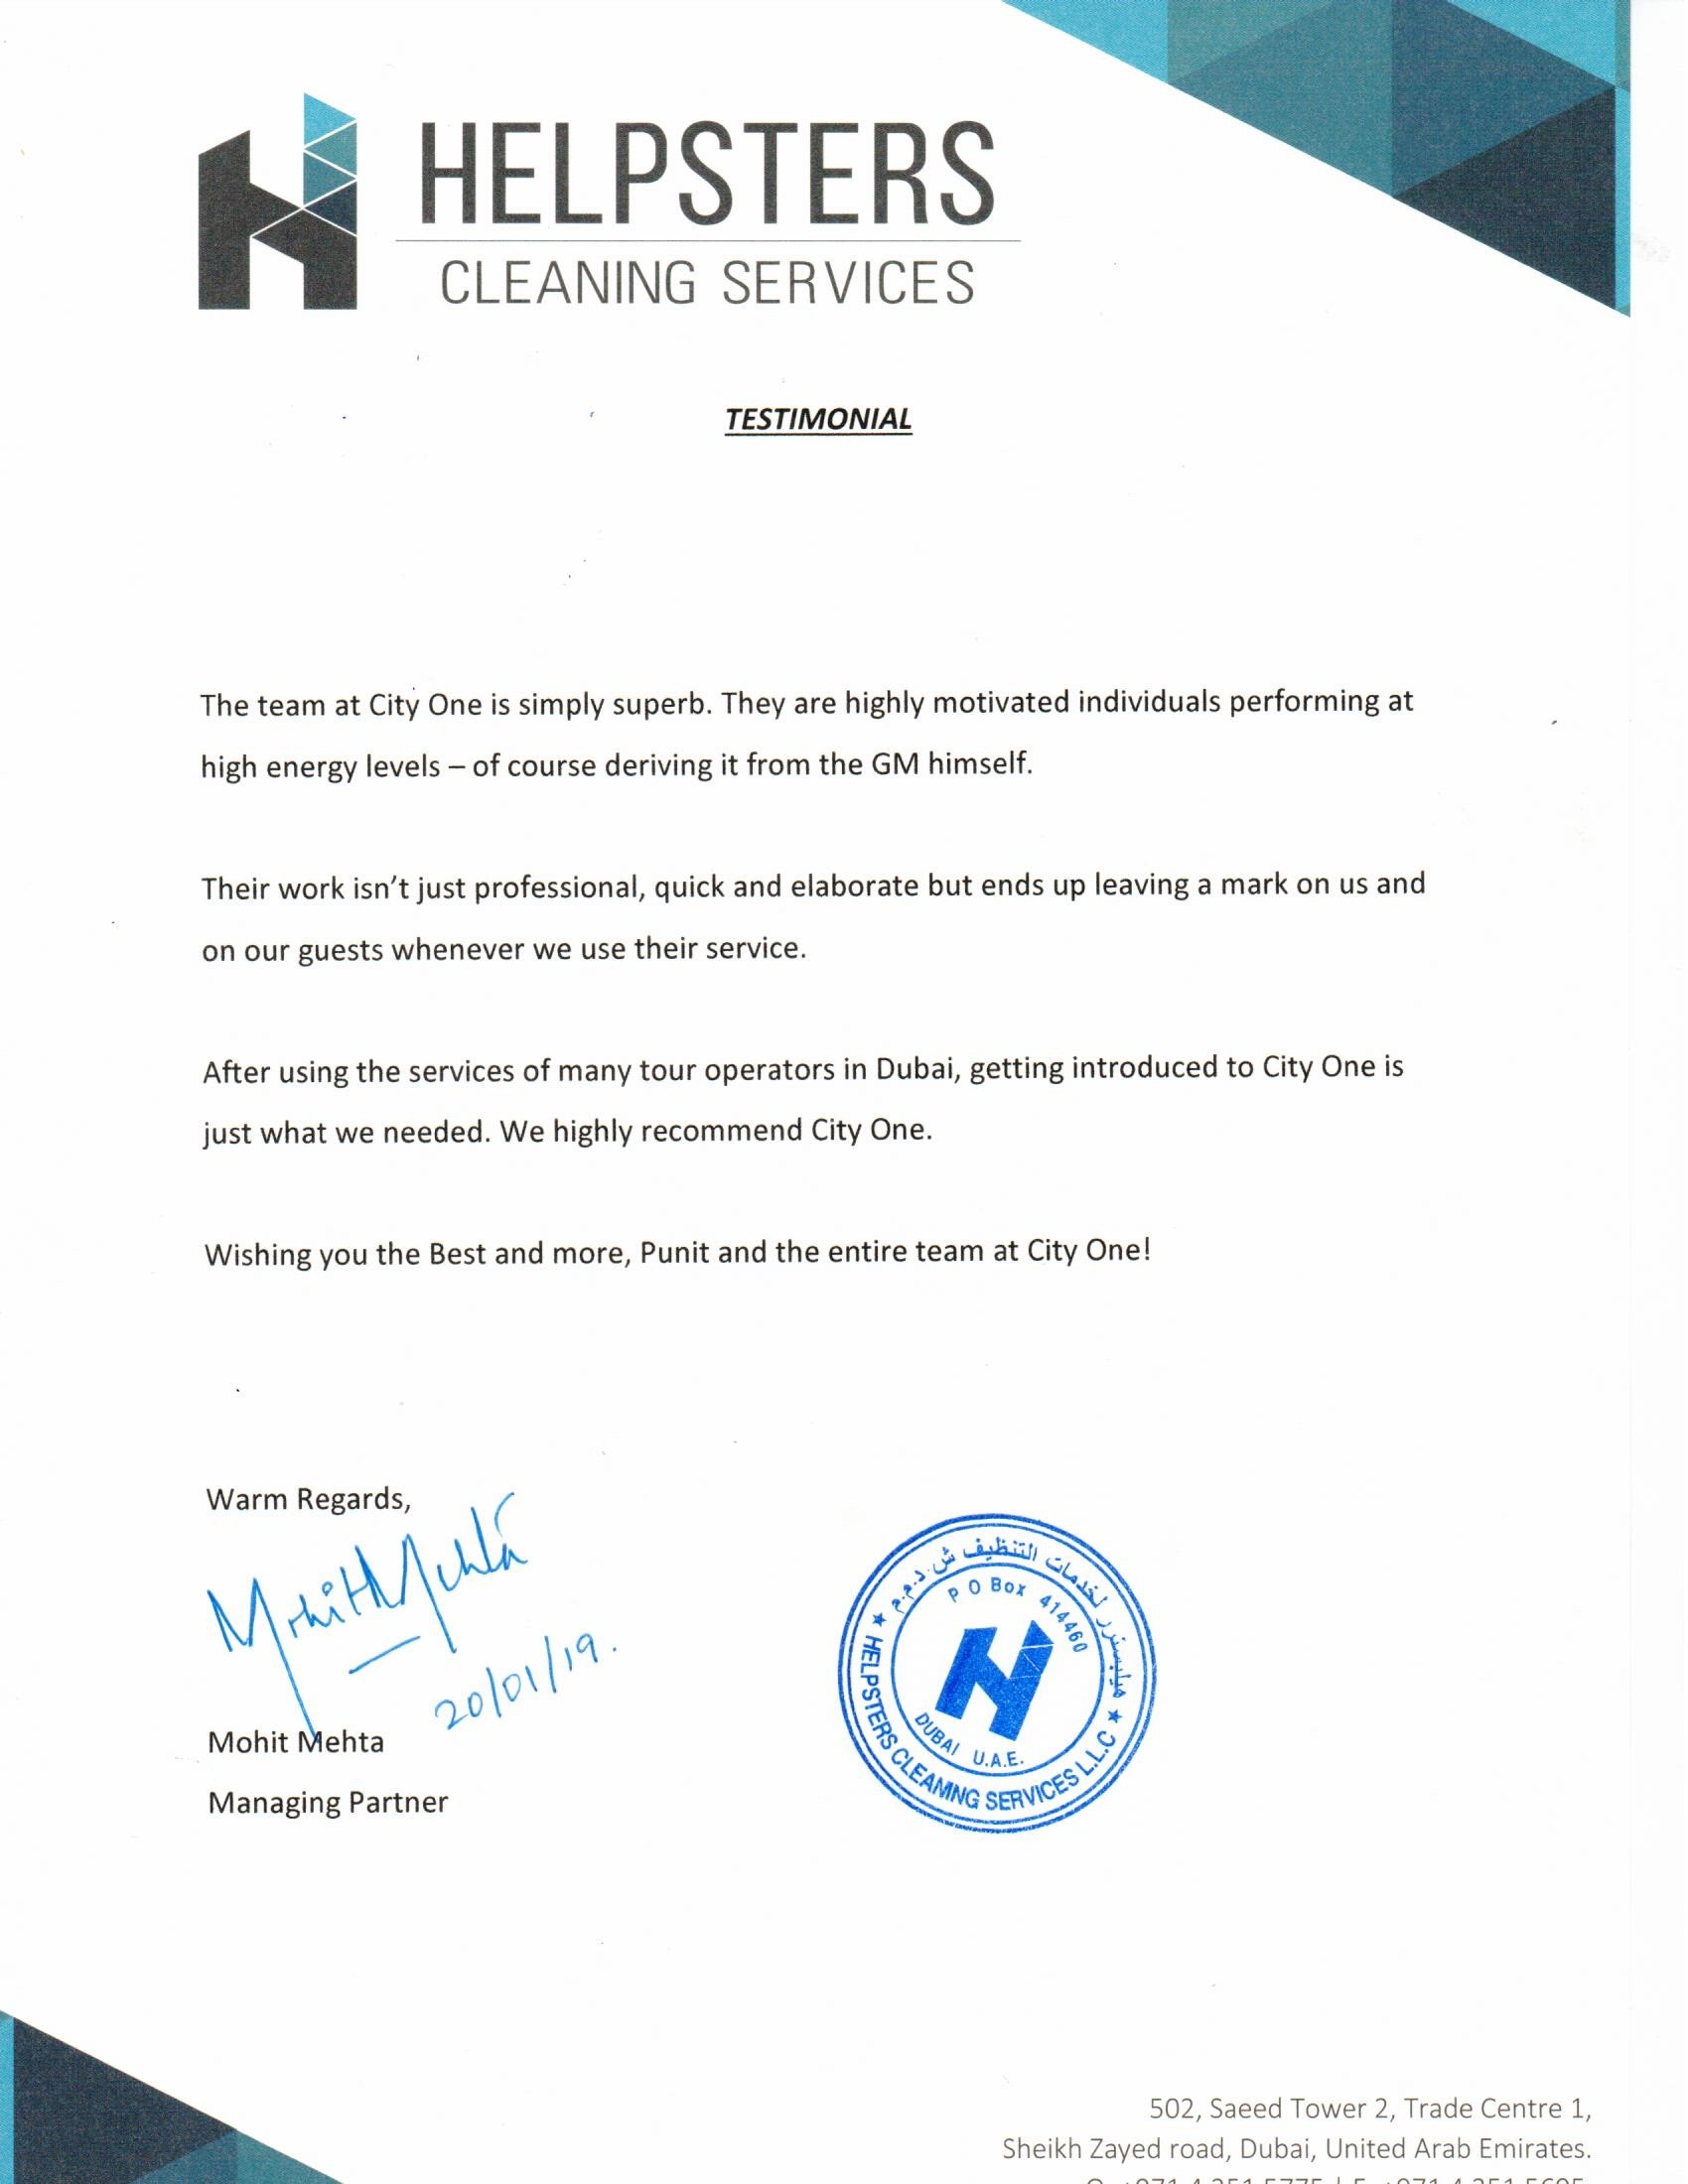 Helpsters Cleaning Services